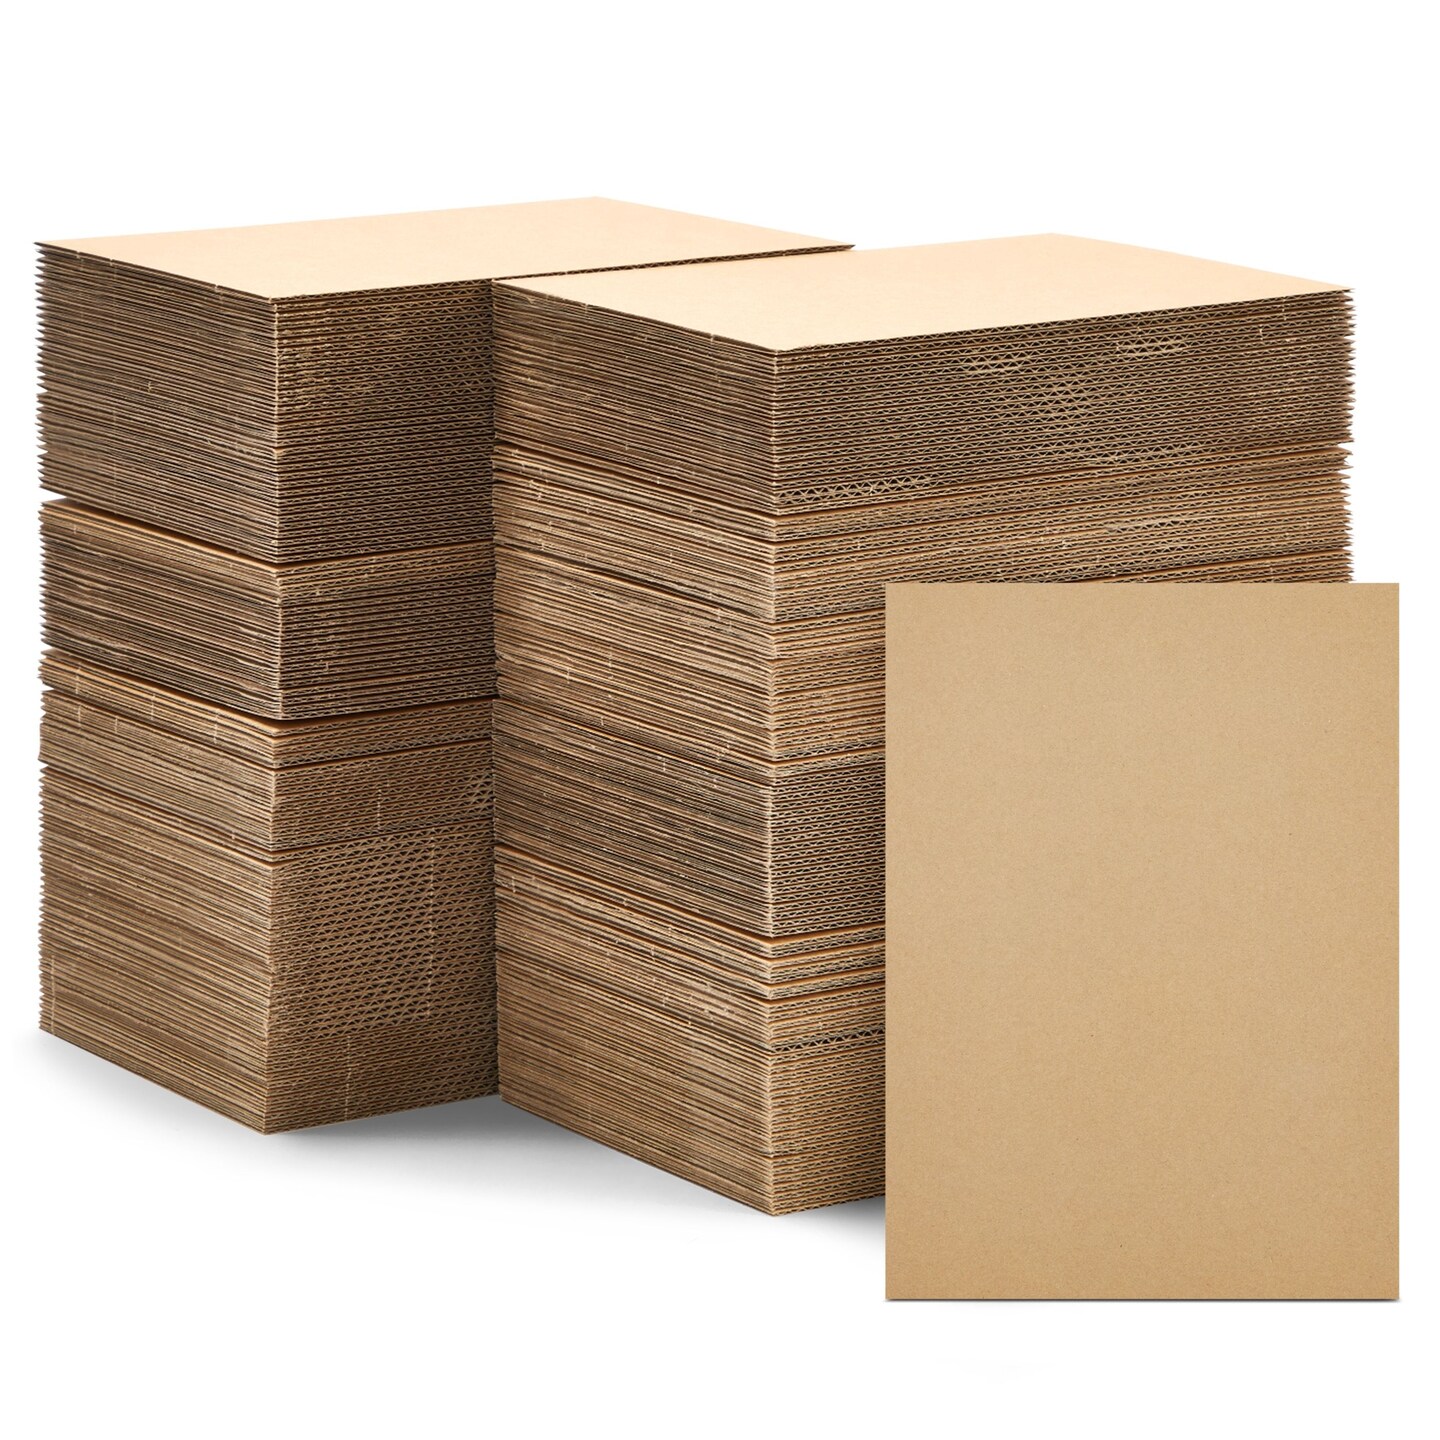 200 Pack 5x7 Corrugated Cardboard Sheets for Mailers, Flat Packaging  Inserts for Shipping, Mailing, Crafts, 2mm Thick